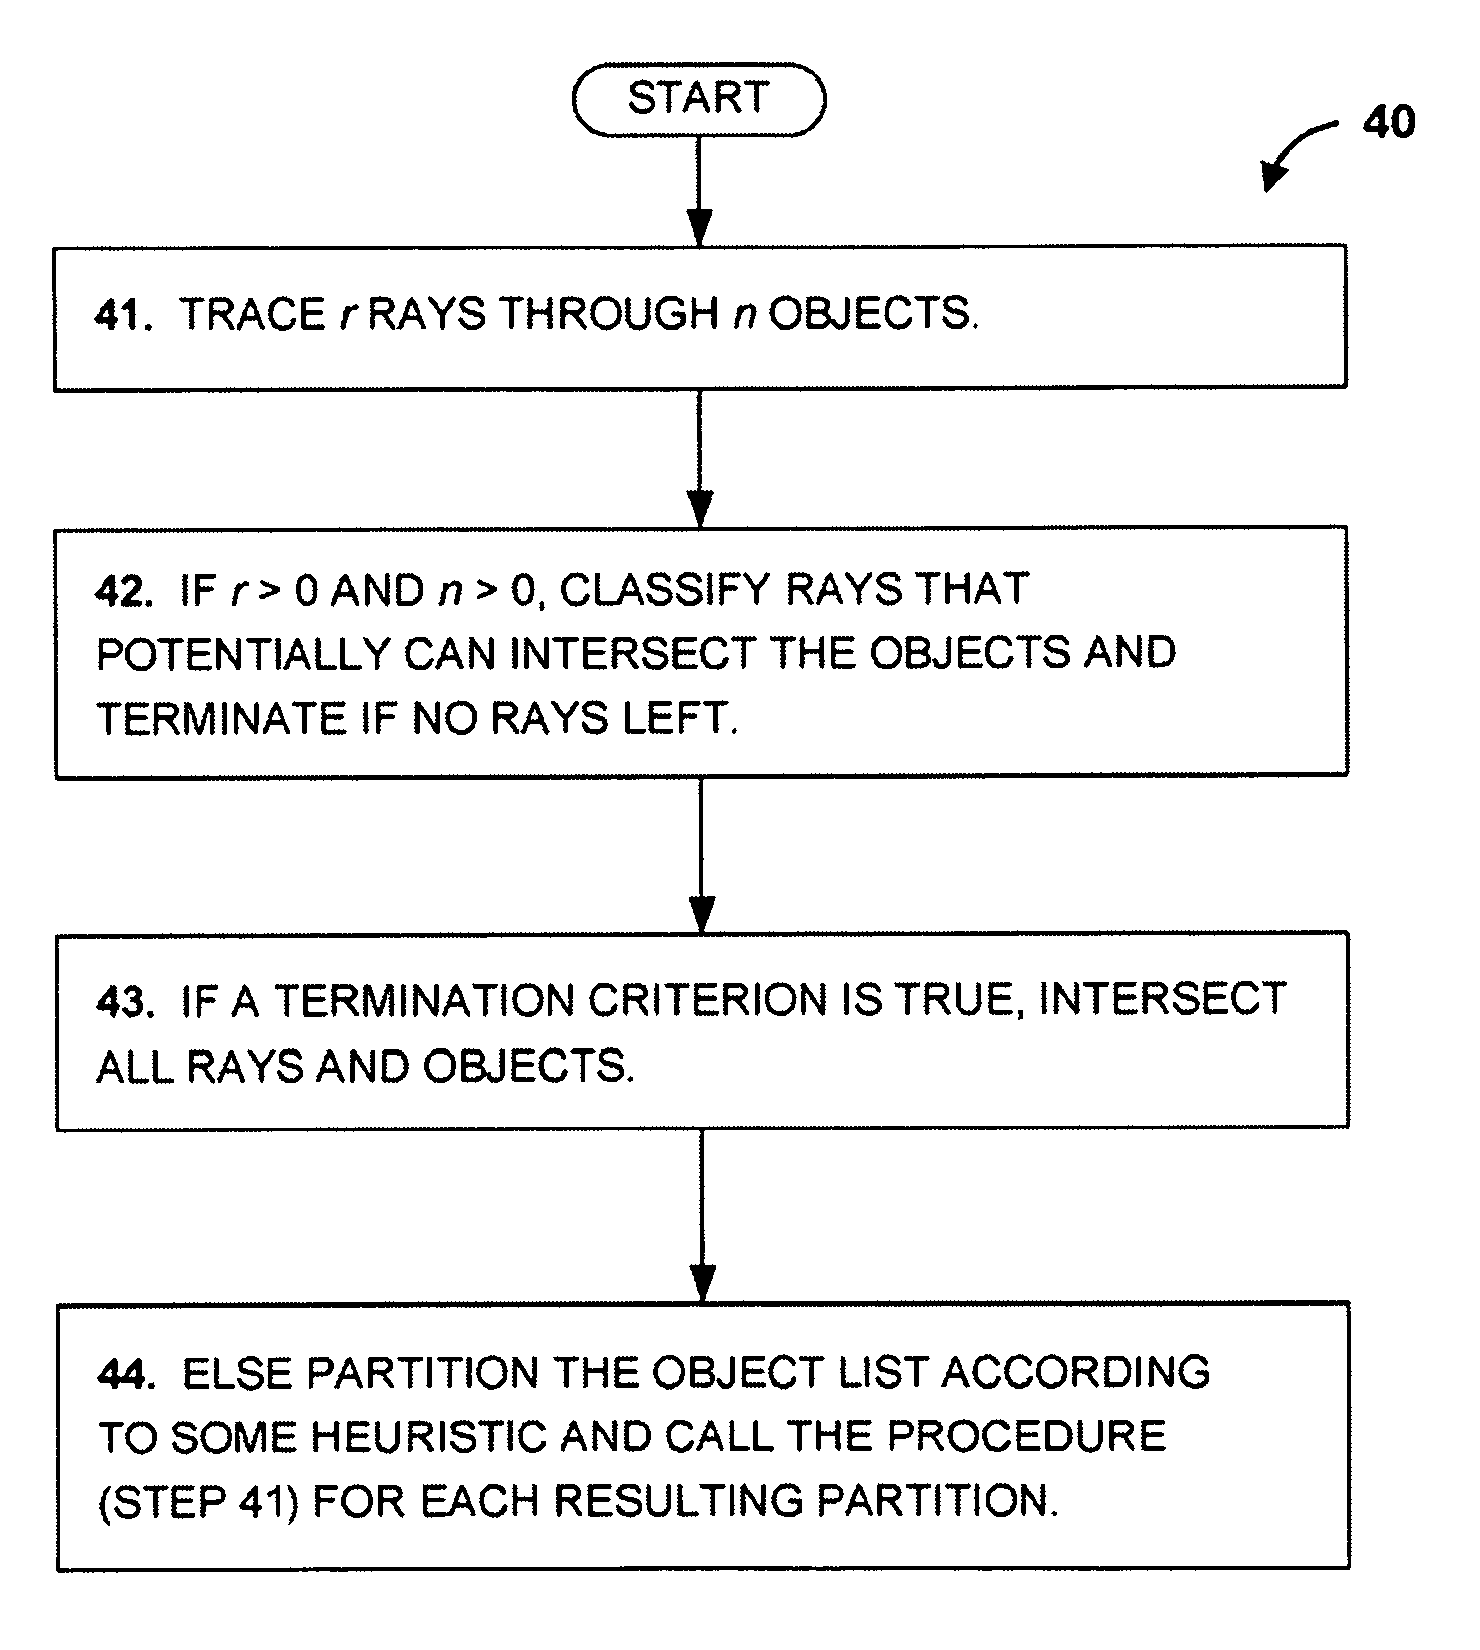 Efficient ray tracing without acceleration data structure